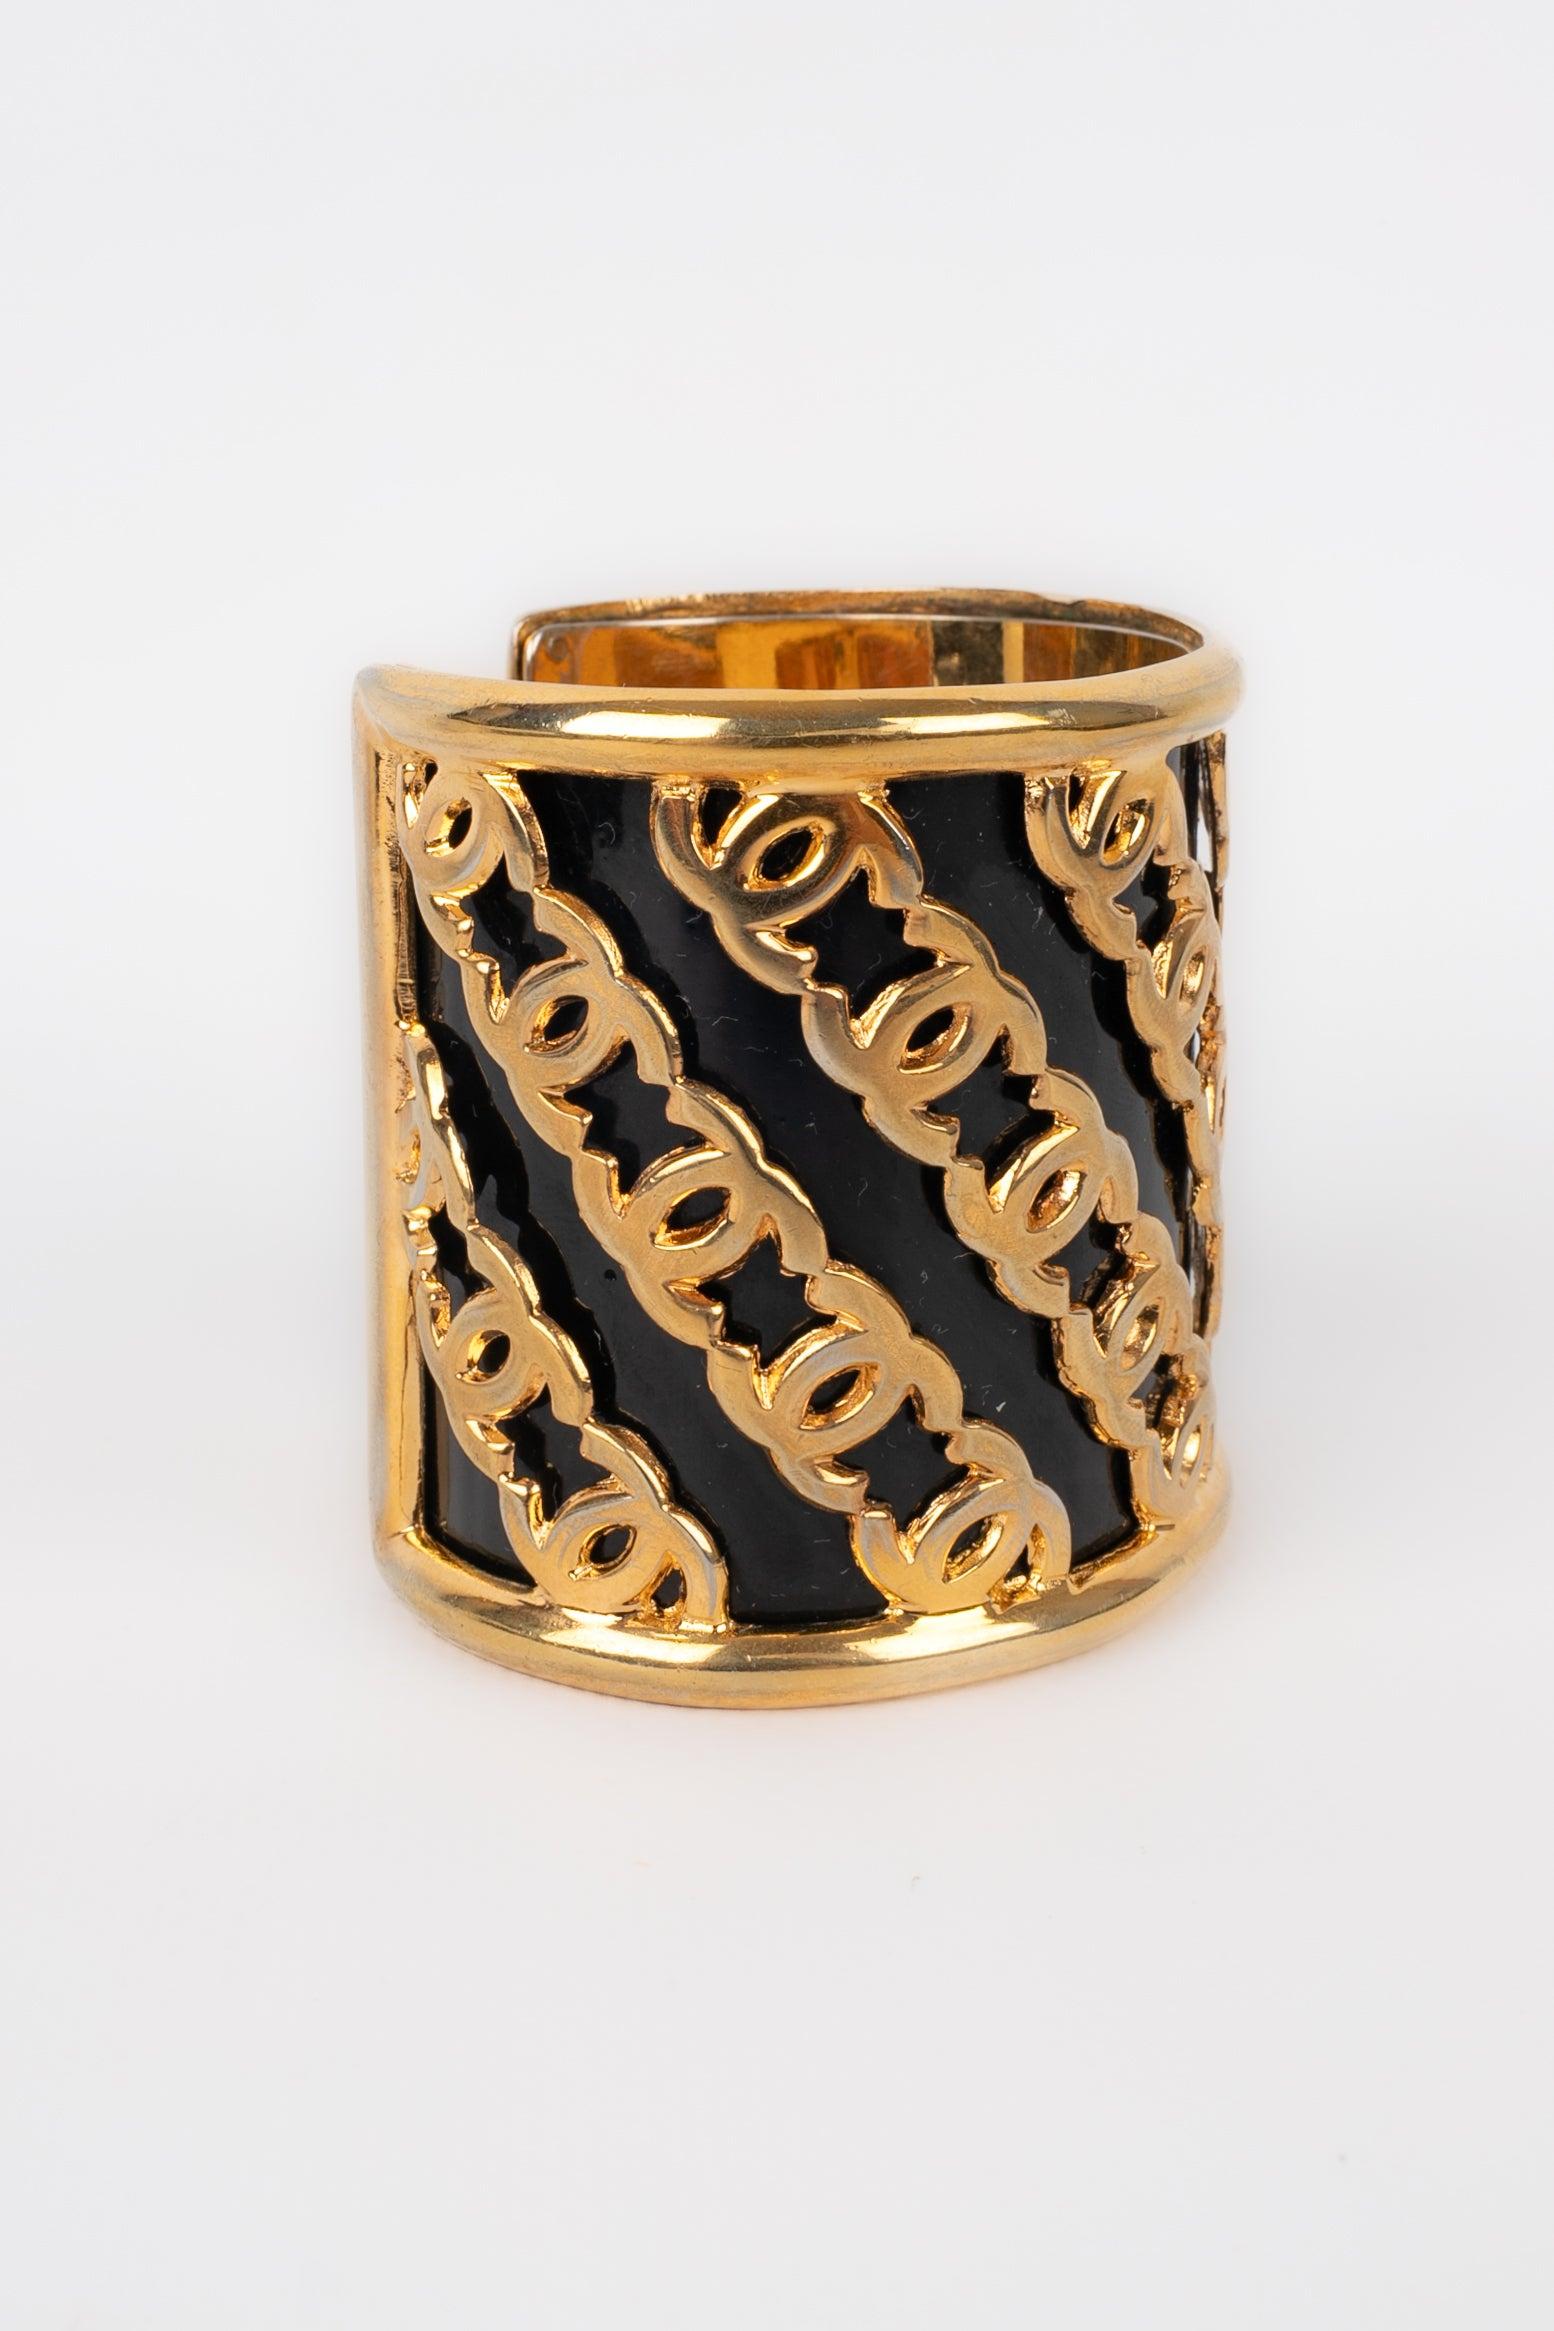 Chanel - Golden metal cuff bracelet enameled with black.
 
 Additional information: 
 Condition: Very good condition
 Dimensions: Wrist circumference: 14 cm - Height: 6 cm
 
 Seller Reference: BRAB44